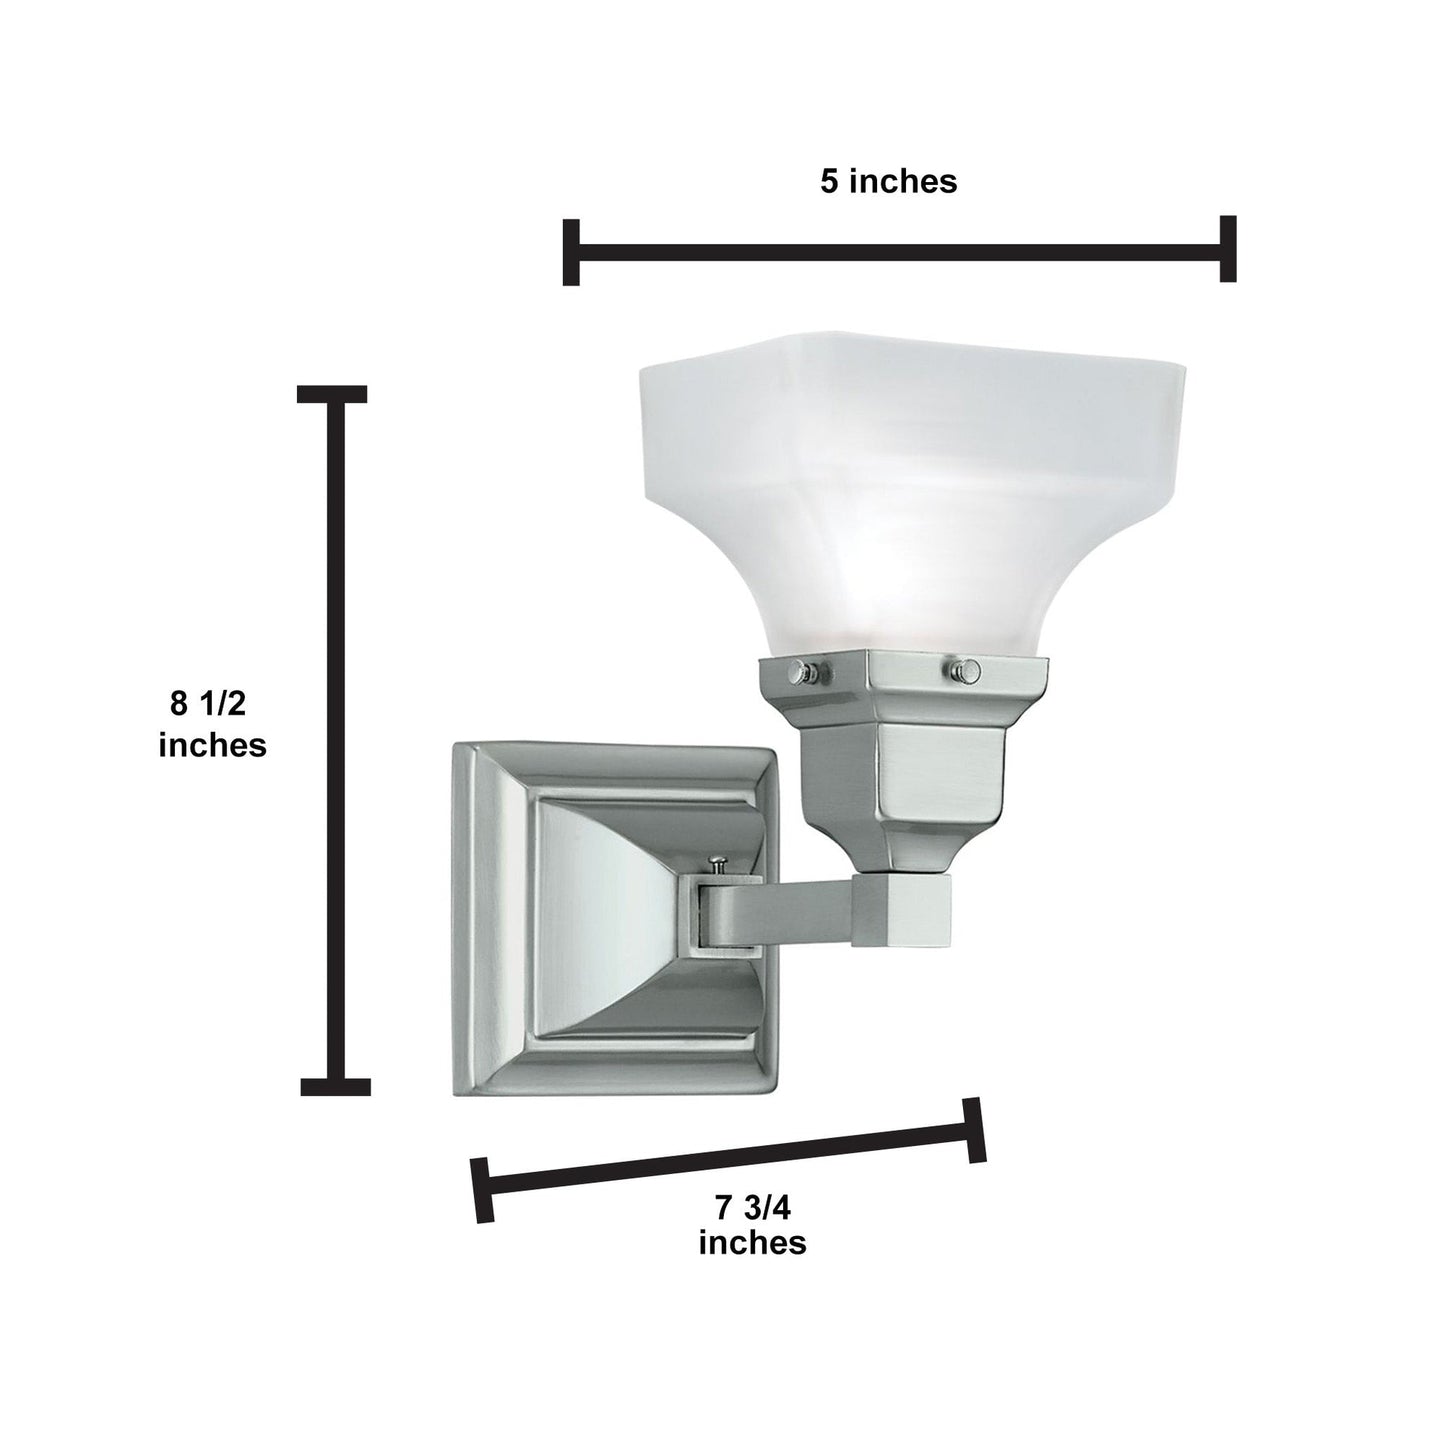 Norwell Lighting Birmingham 9" x 5" 1-Light Chrome Vanity Wall Sconce With Square Glass Diffuser